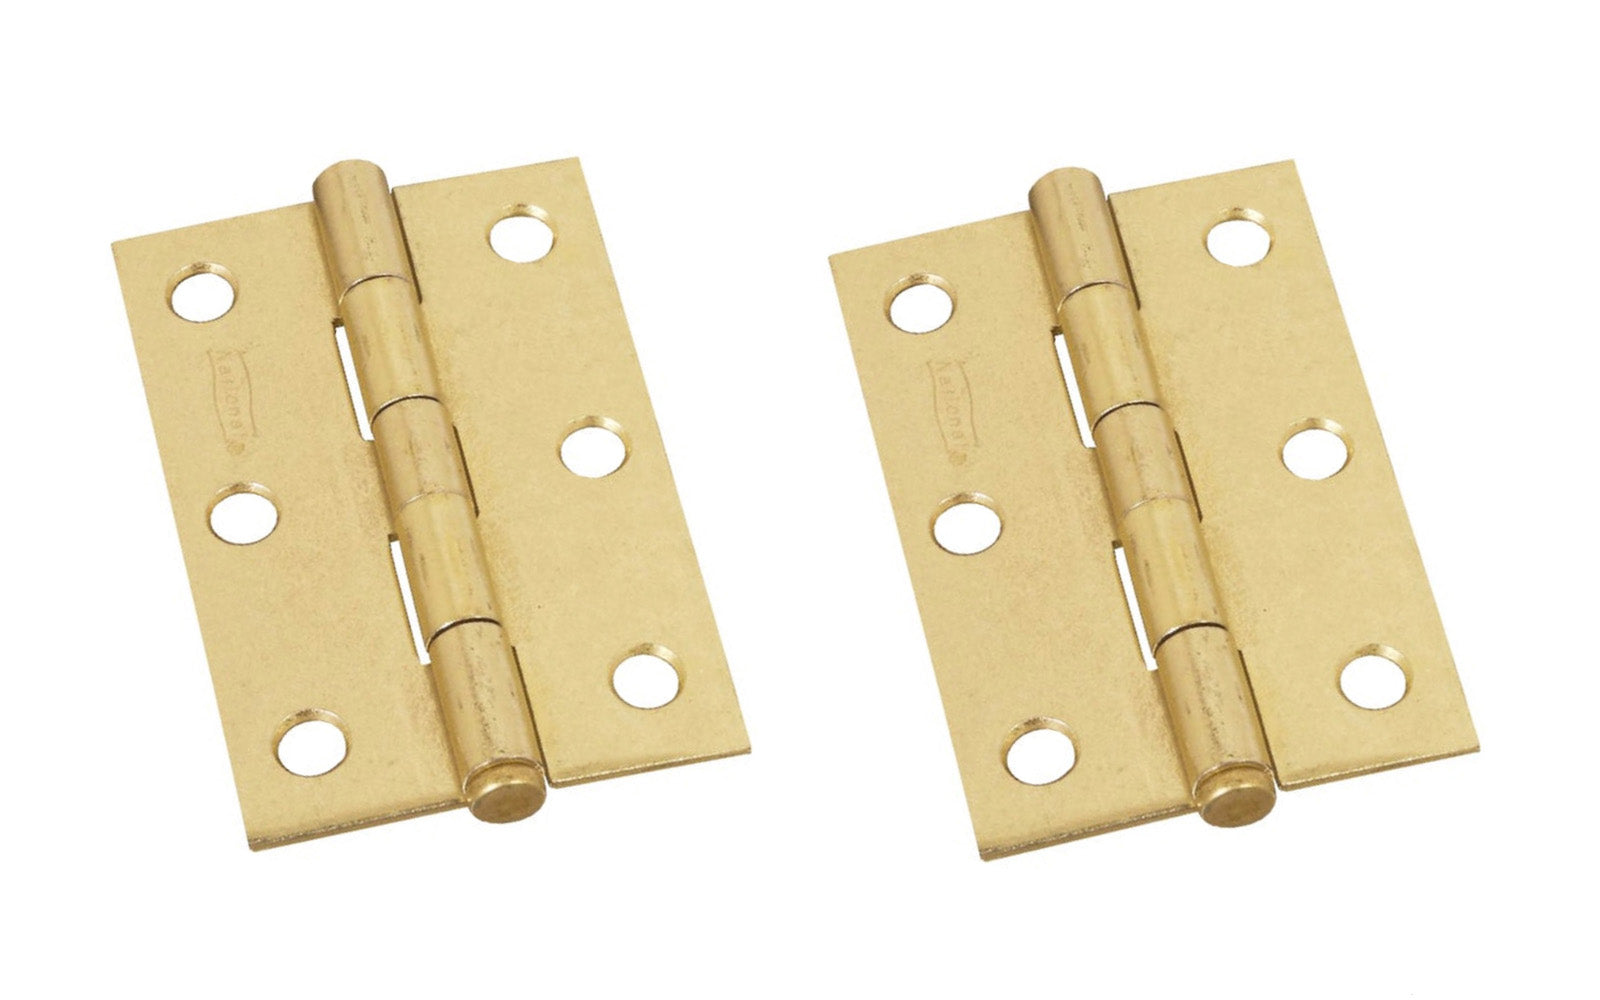 3" Brass-Plated Loose-Pin Narrow Hinges - 2 Pack. 3" high x 2-1/16" wide. Made of cold-rolled steel with brass plating. Surface mount. Removable pin hinges. Sold as a pair of hinges. National Hardware Model No. N142-067. 038613142060